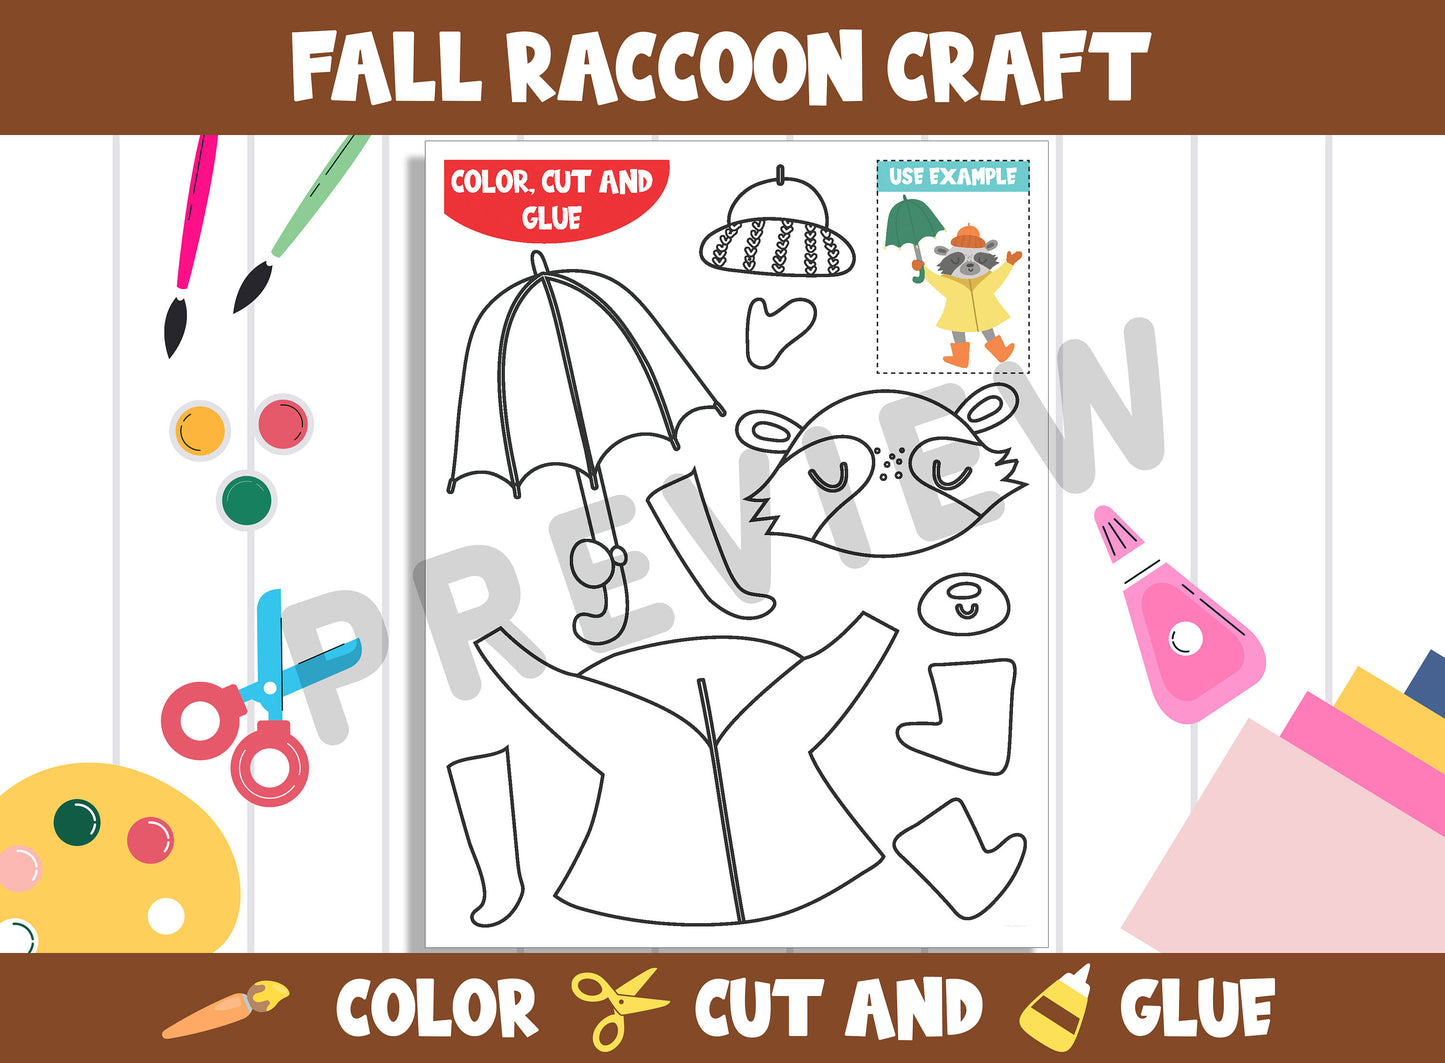 Fall Raccoon Craft Activity - Color, Cut, and Glue for PreK to 2nd Grade, PDF File, Instant Download